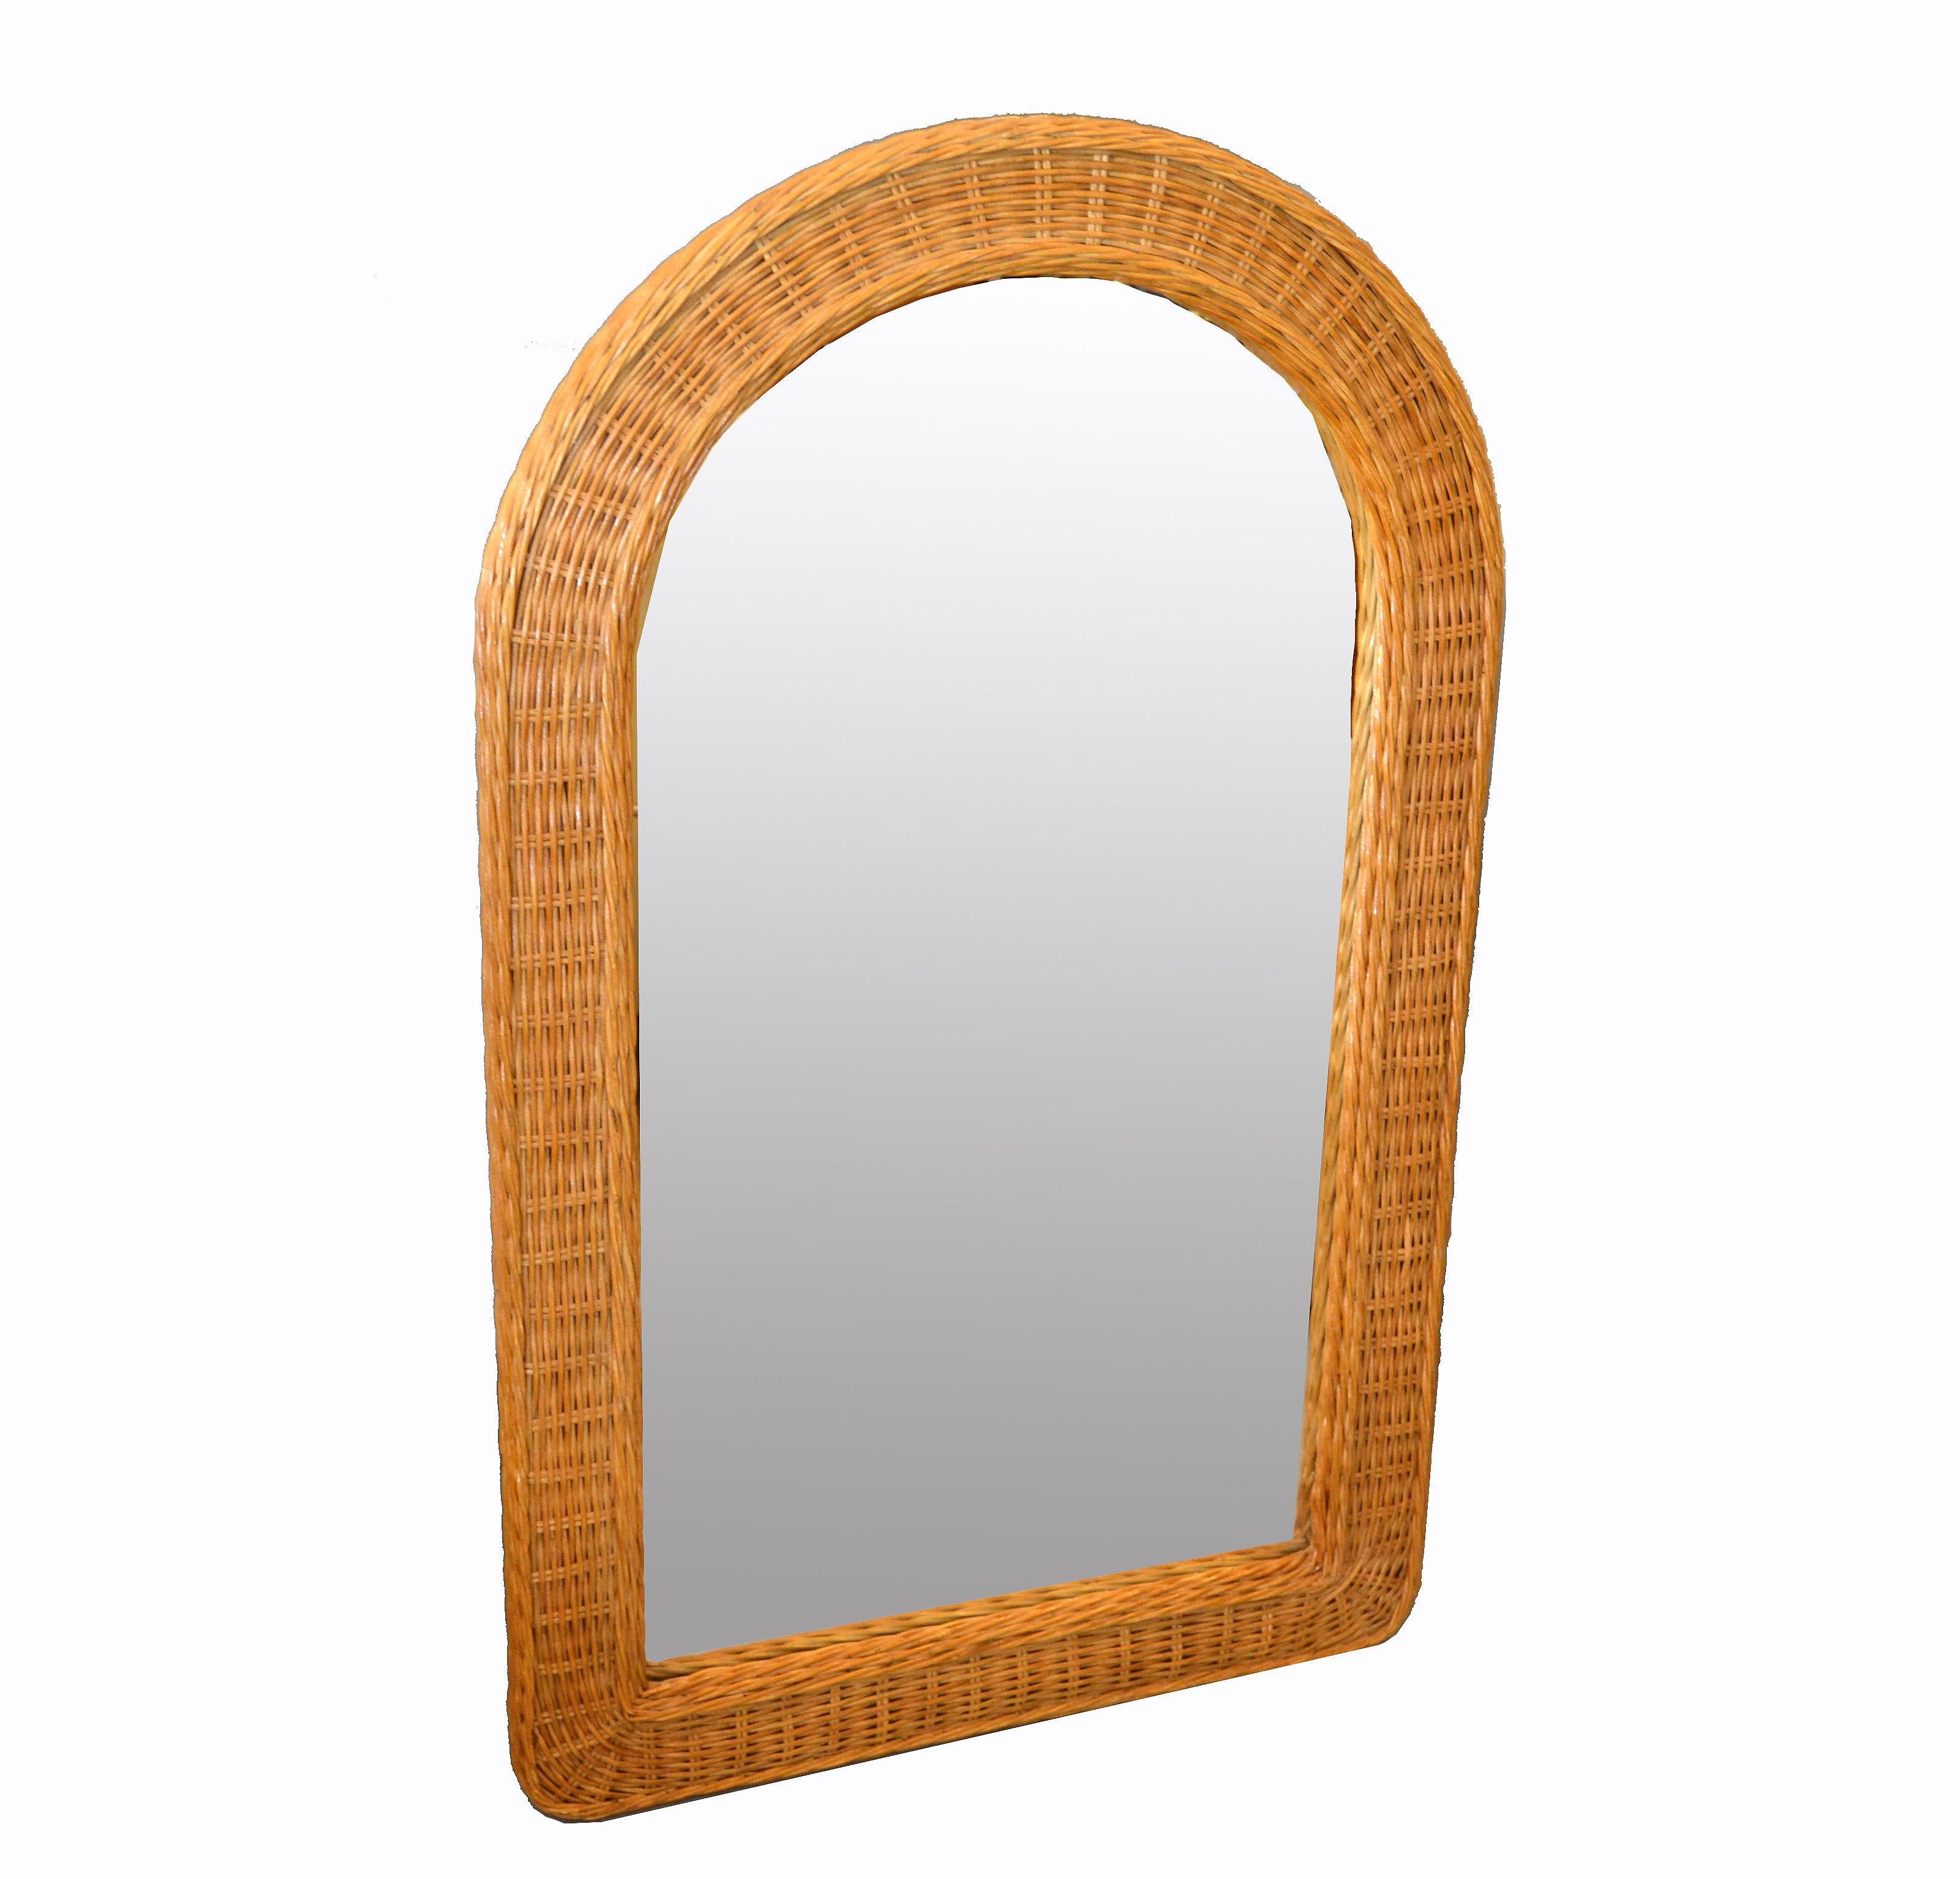 Mid-Century Modern boho chic arch shaped handwoven rattan, wicker wall mirror.
Exemplary construction, woven ties are firmly linked.
Florida Design for Your Sunroom.